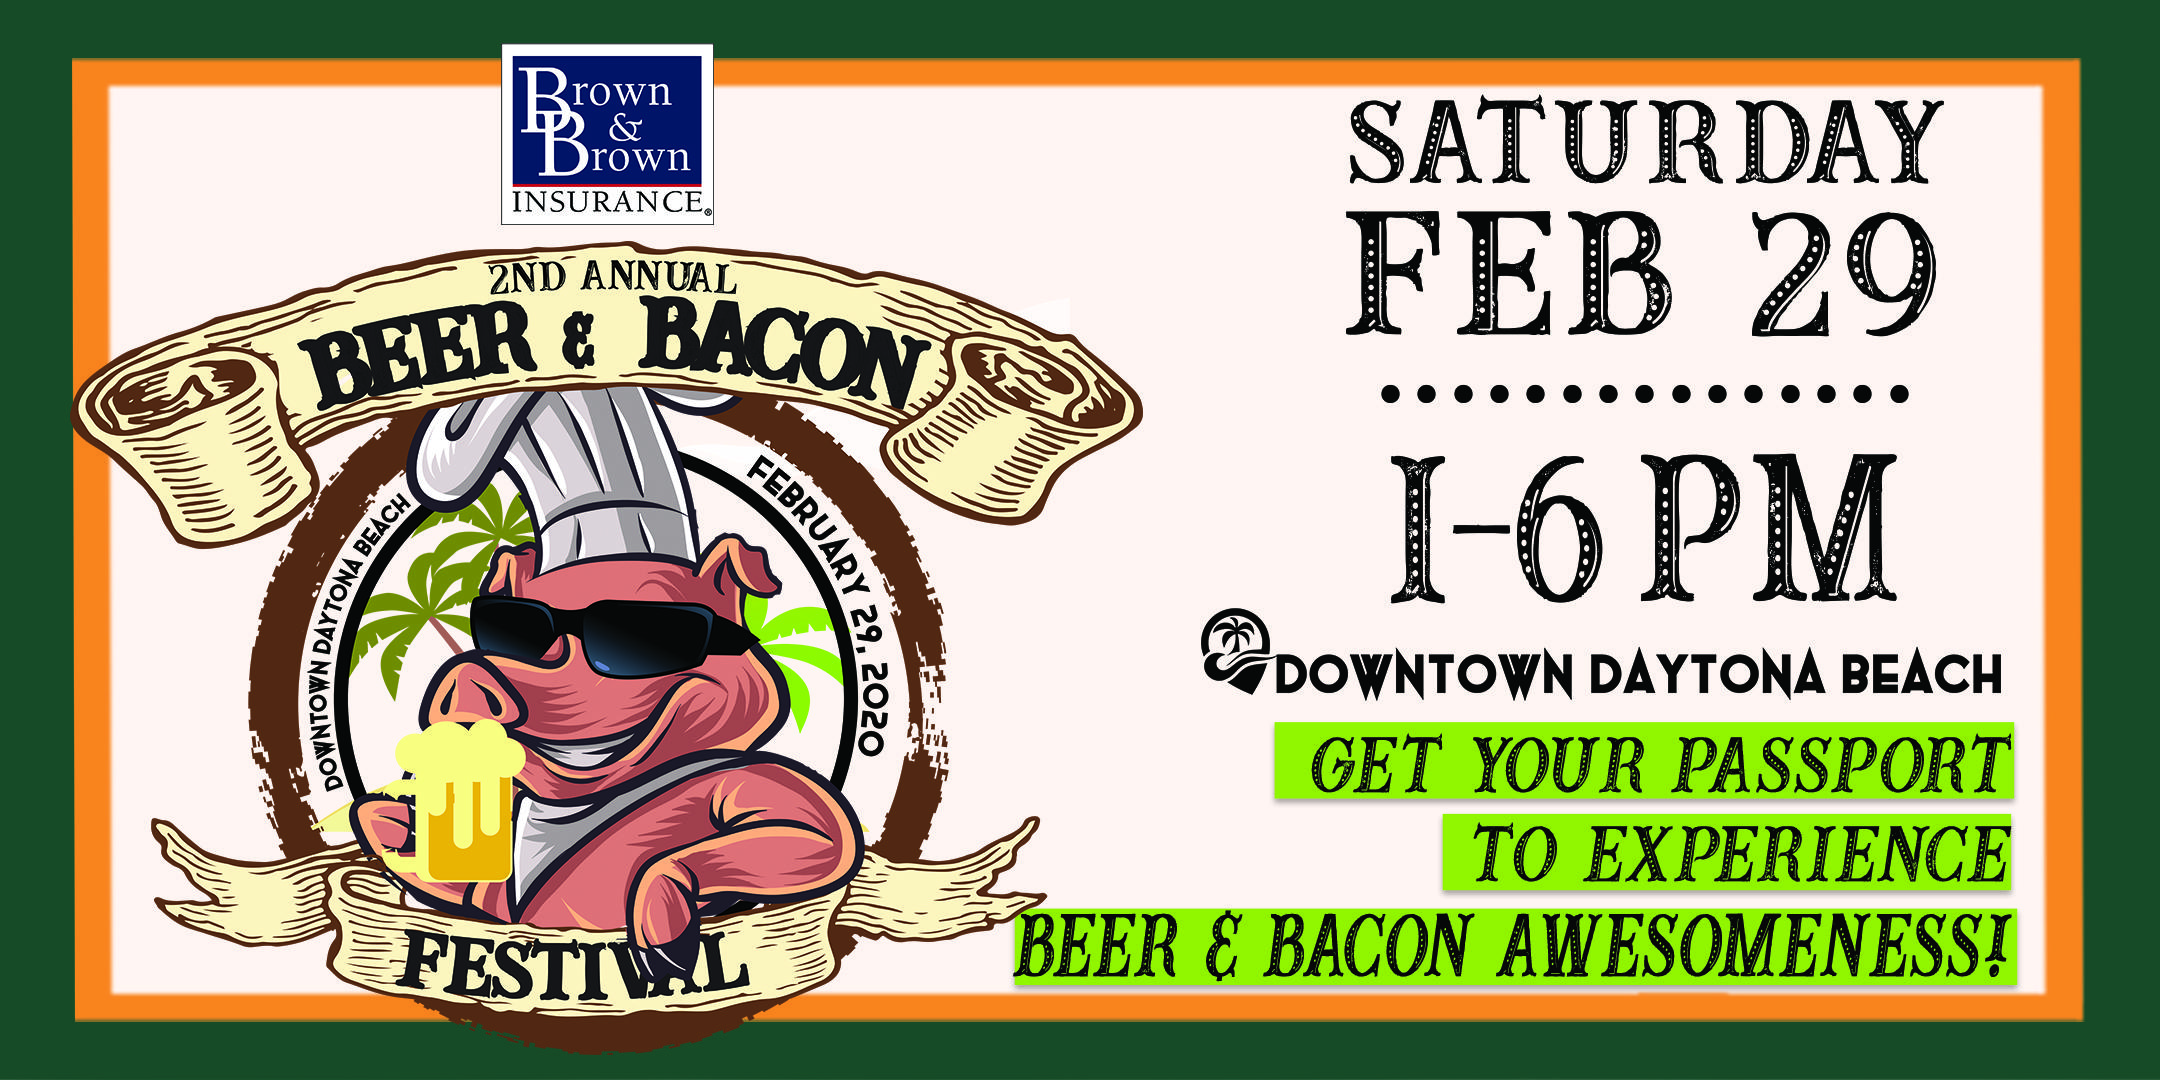 2nd Annual Beer & Bacon Festival 29 FEB 2020